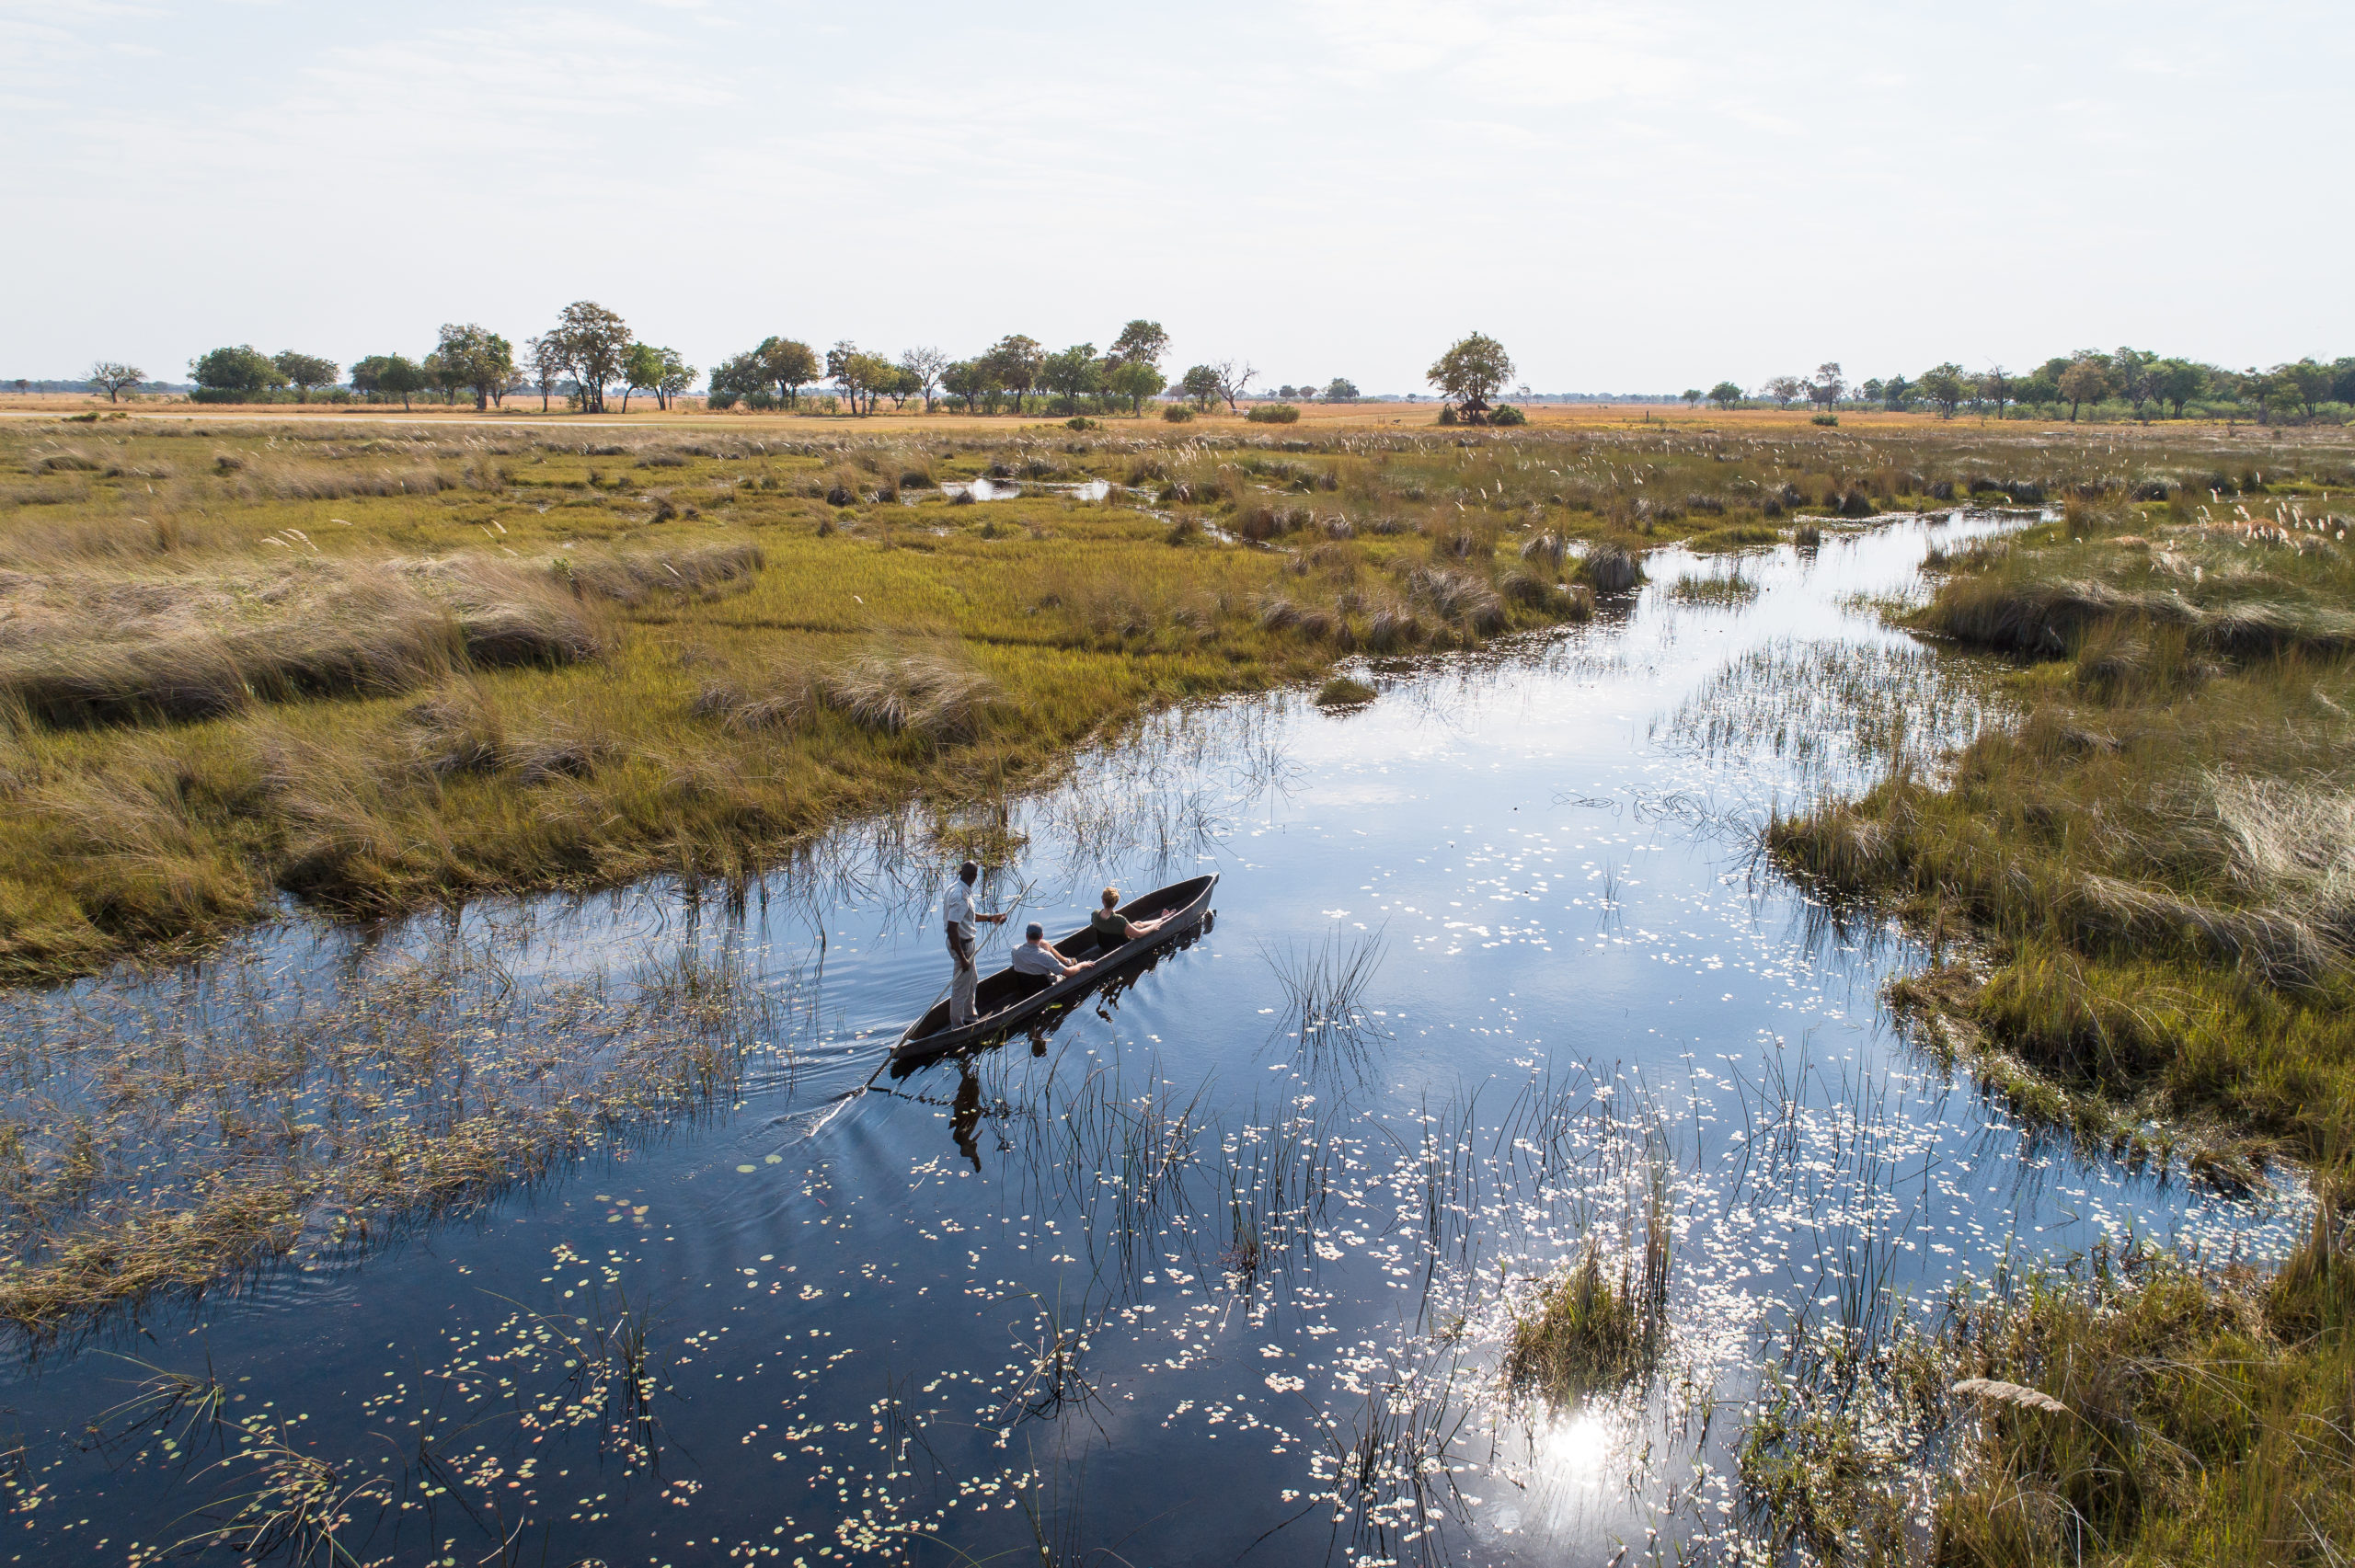 Traverse extraordinary Okavango Delta landscape like this dazzling waterway when you take a tailor-made Meet friendly locals like this Cambodian lady when you take a tailor-made holiday with Alfred& with Alfred&